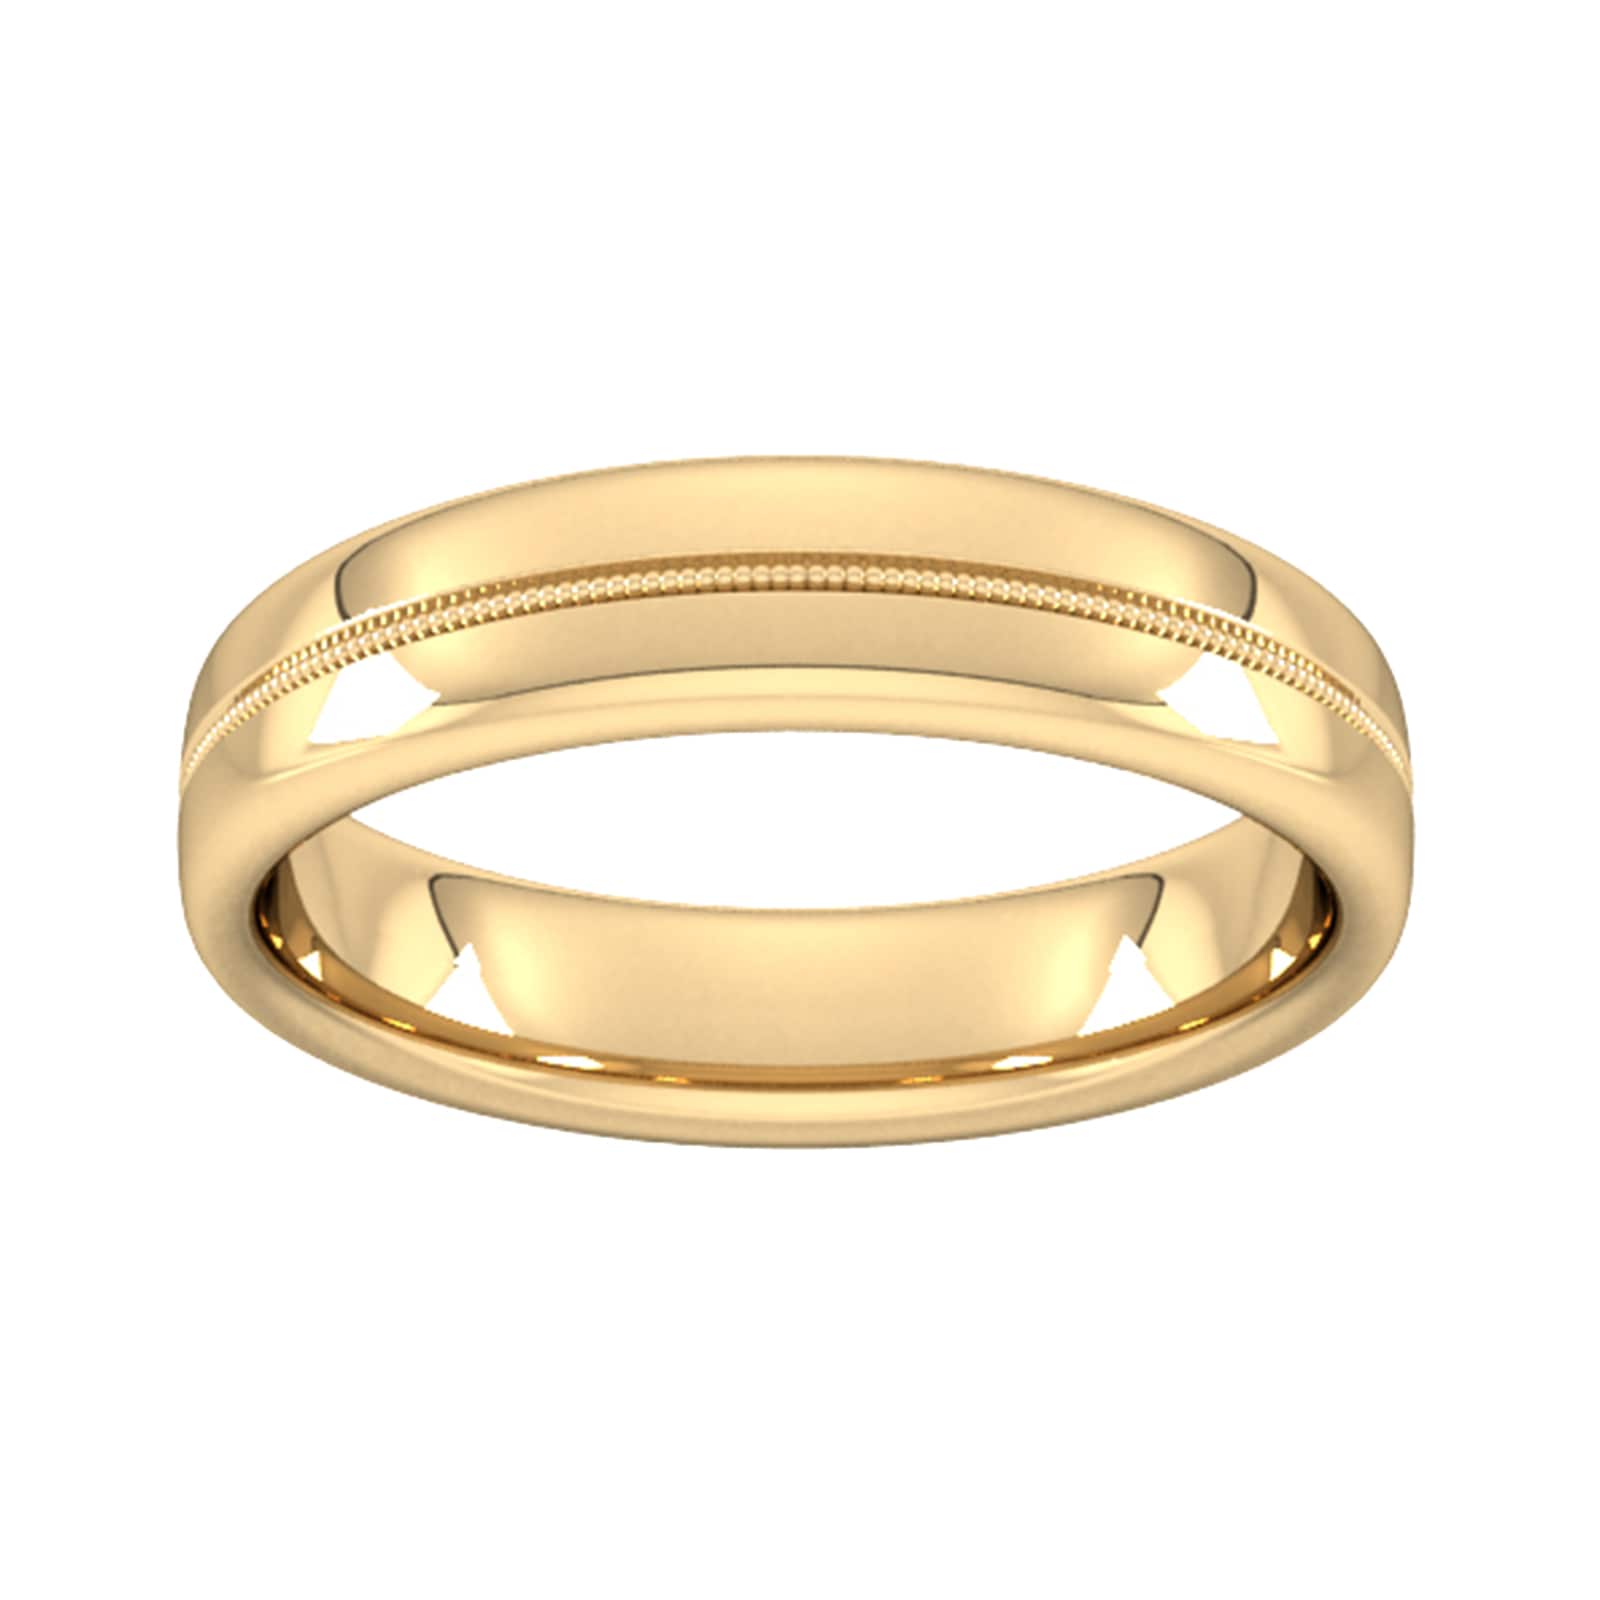 5mm Traditional Court Standard Milgrain Centre Wedding Ring In 9 Carat Yellow Gold - Ring Size H